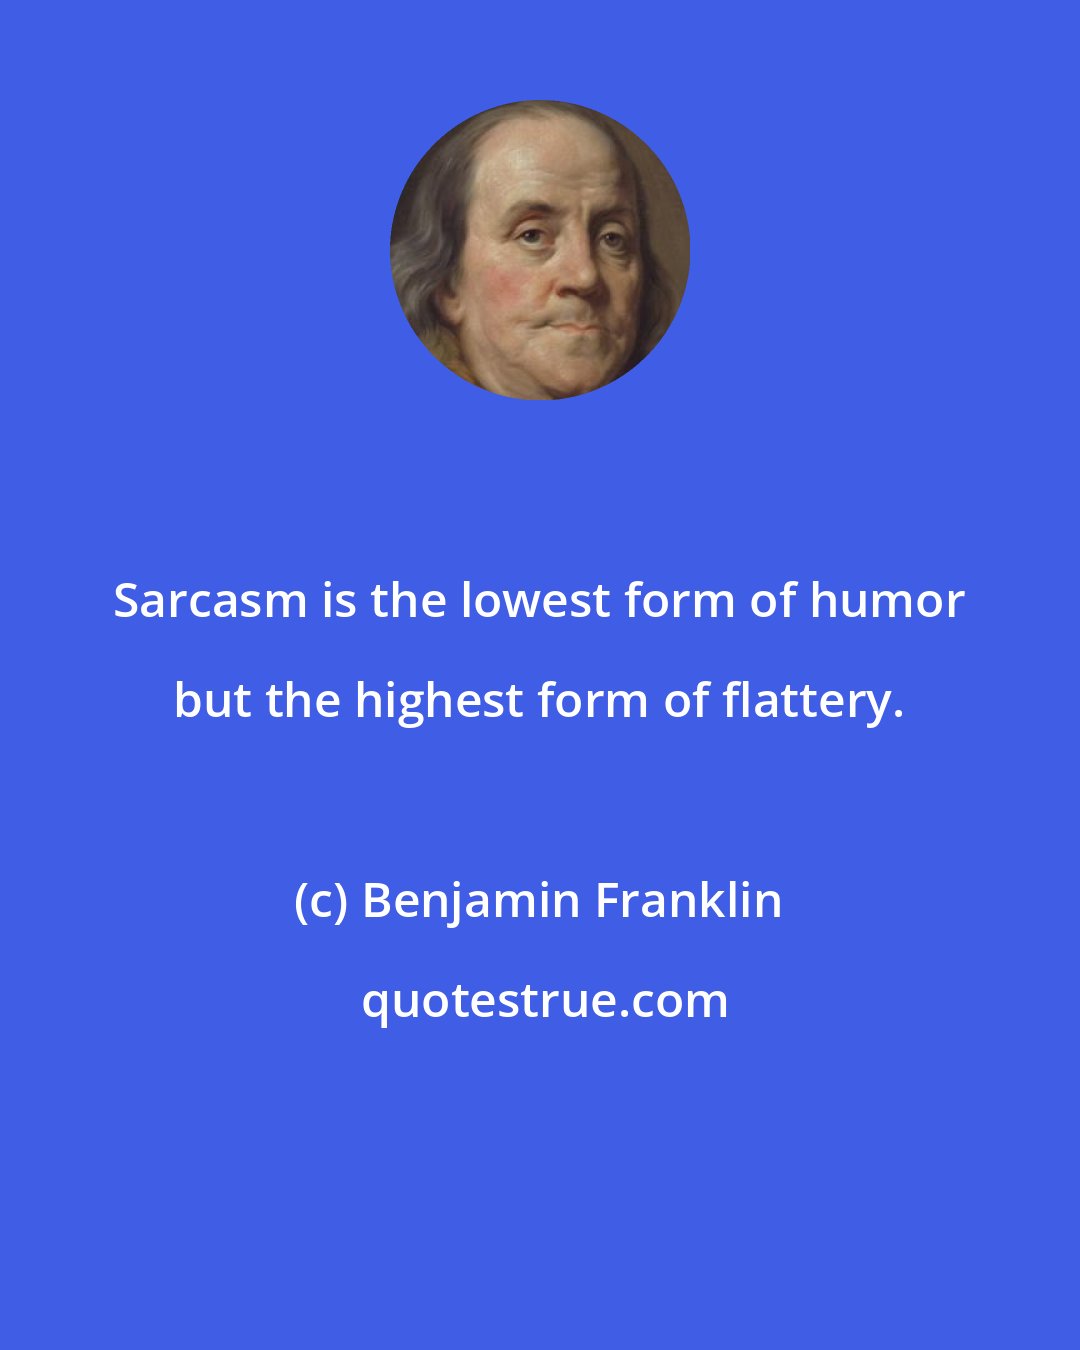 Benjamin Franklin: Sarcasm is the lowest form of humor but the highest form of flattery.